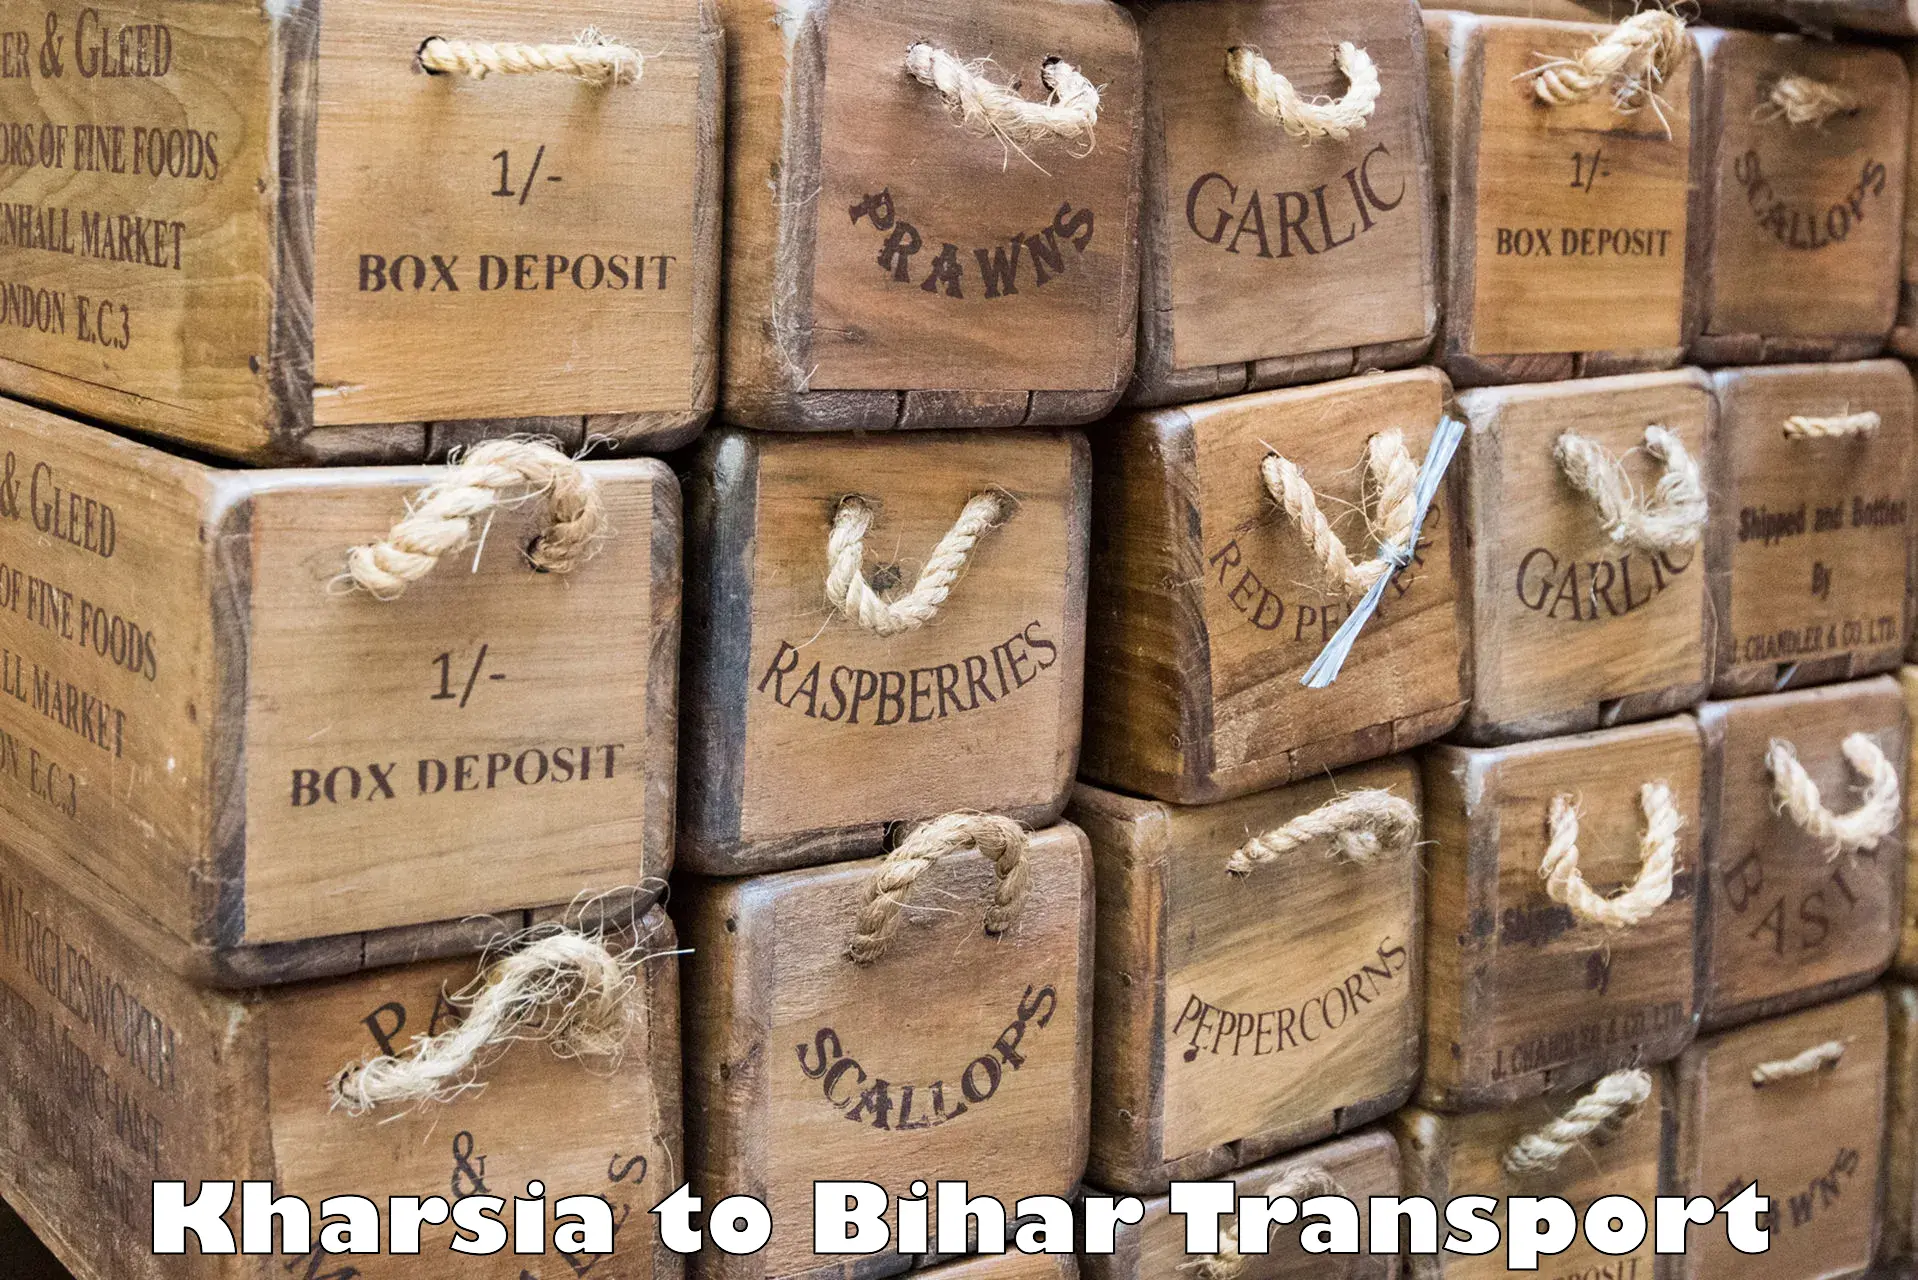 Air freight transport services Kharsia to Bagaha